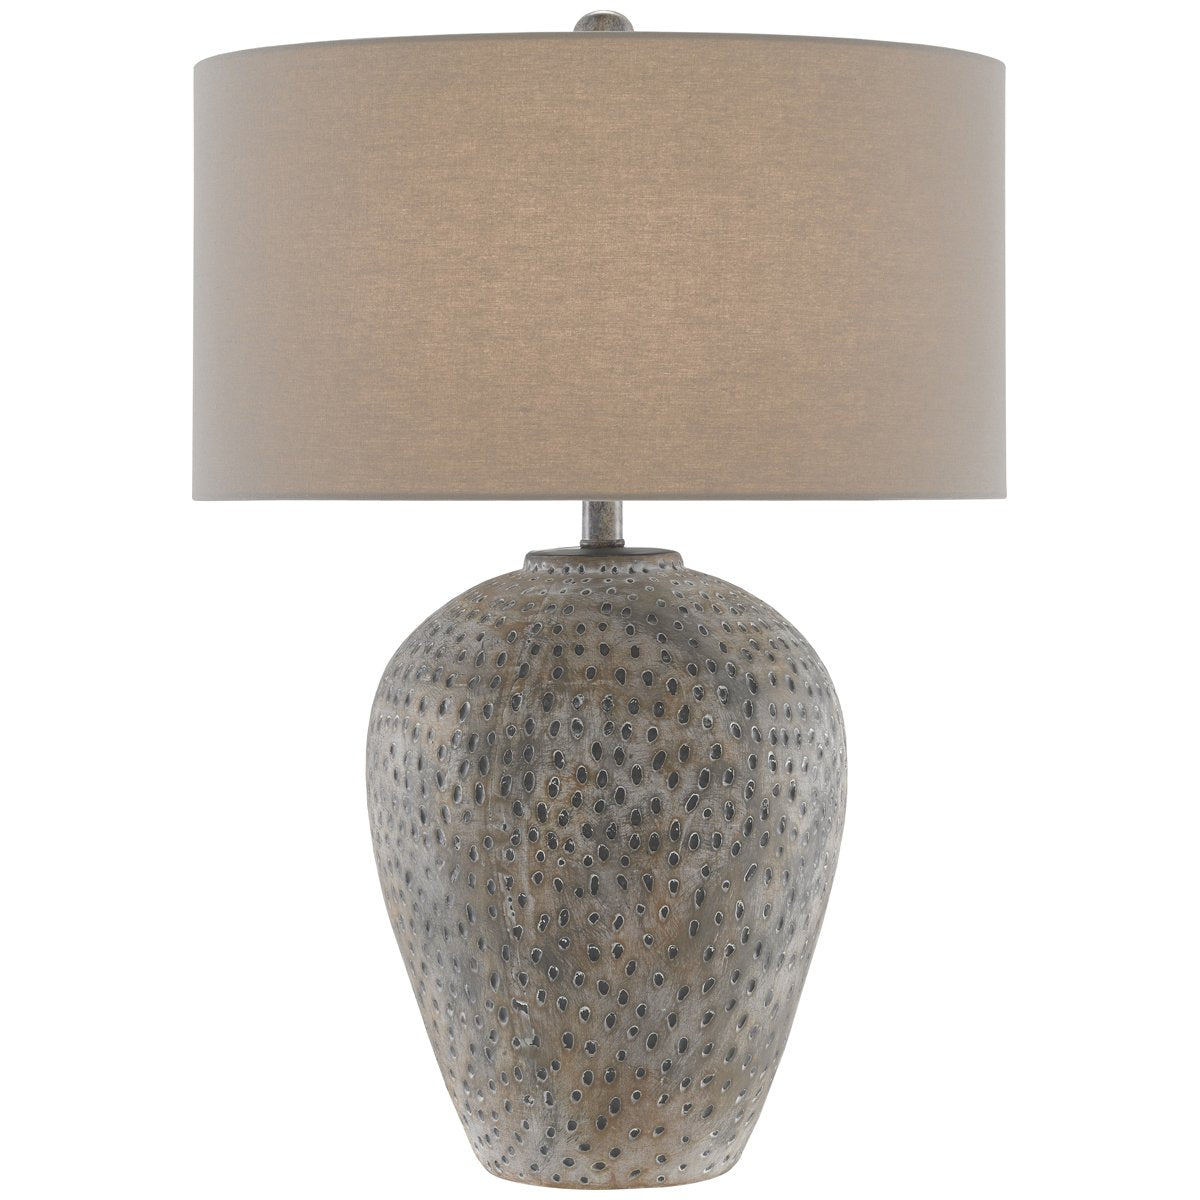 Currey and Company Junius Table Lamp